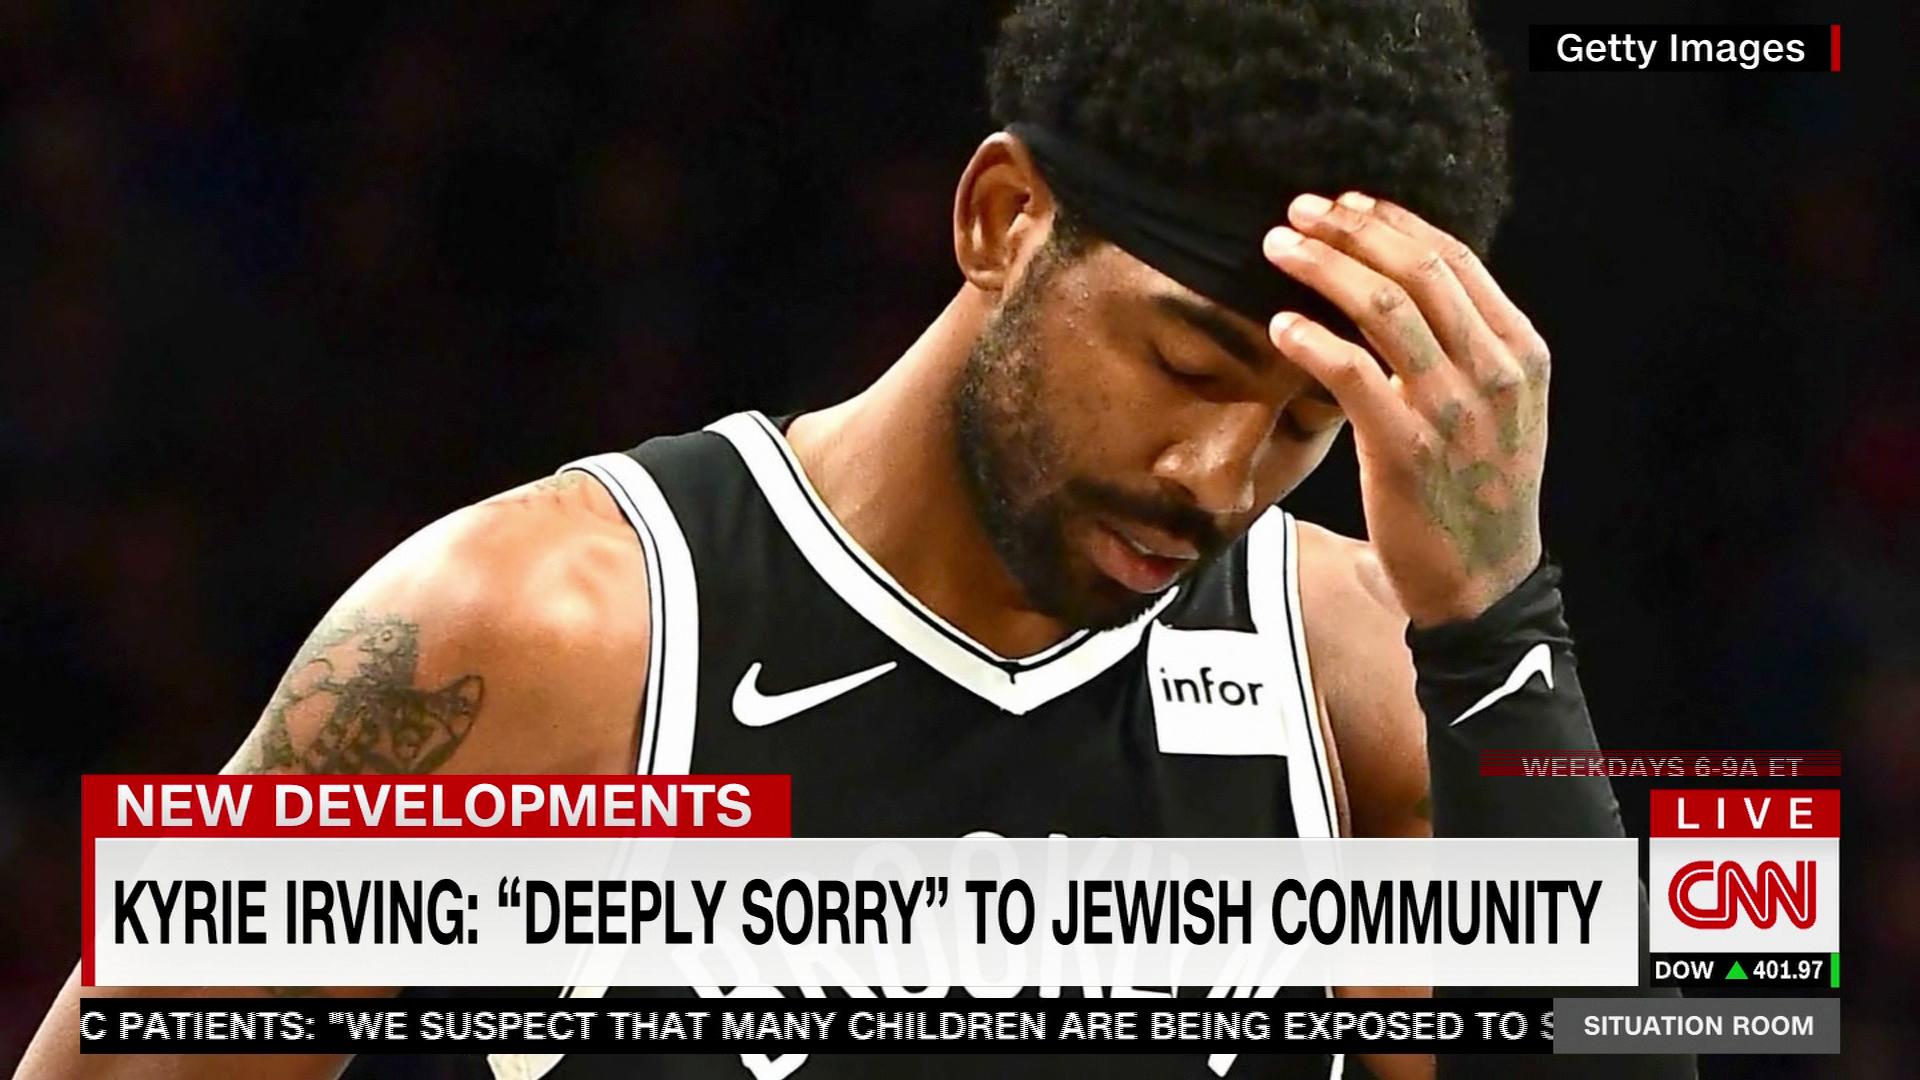 Kyrie Irving rejoins Nets after 8-game ban, apologizes for hurt his actions  caused